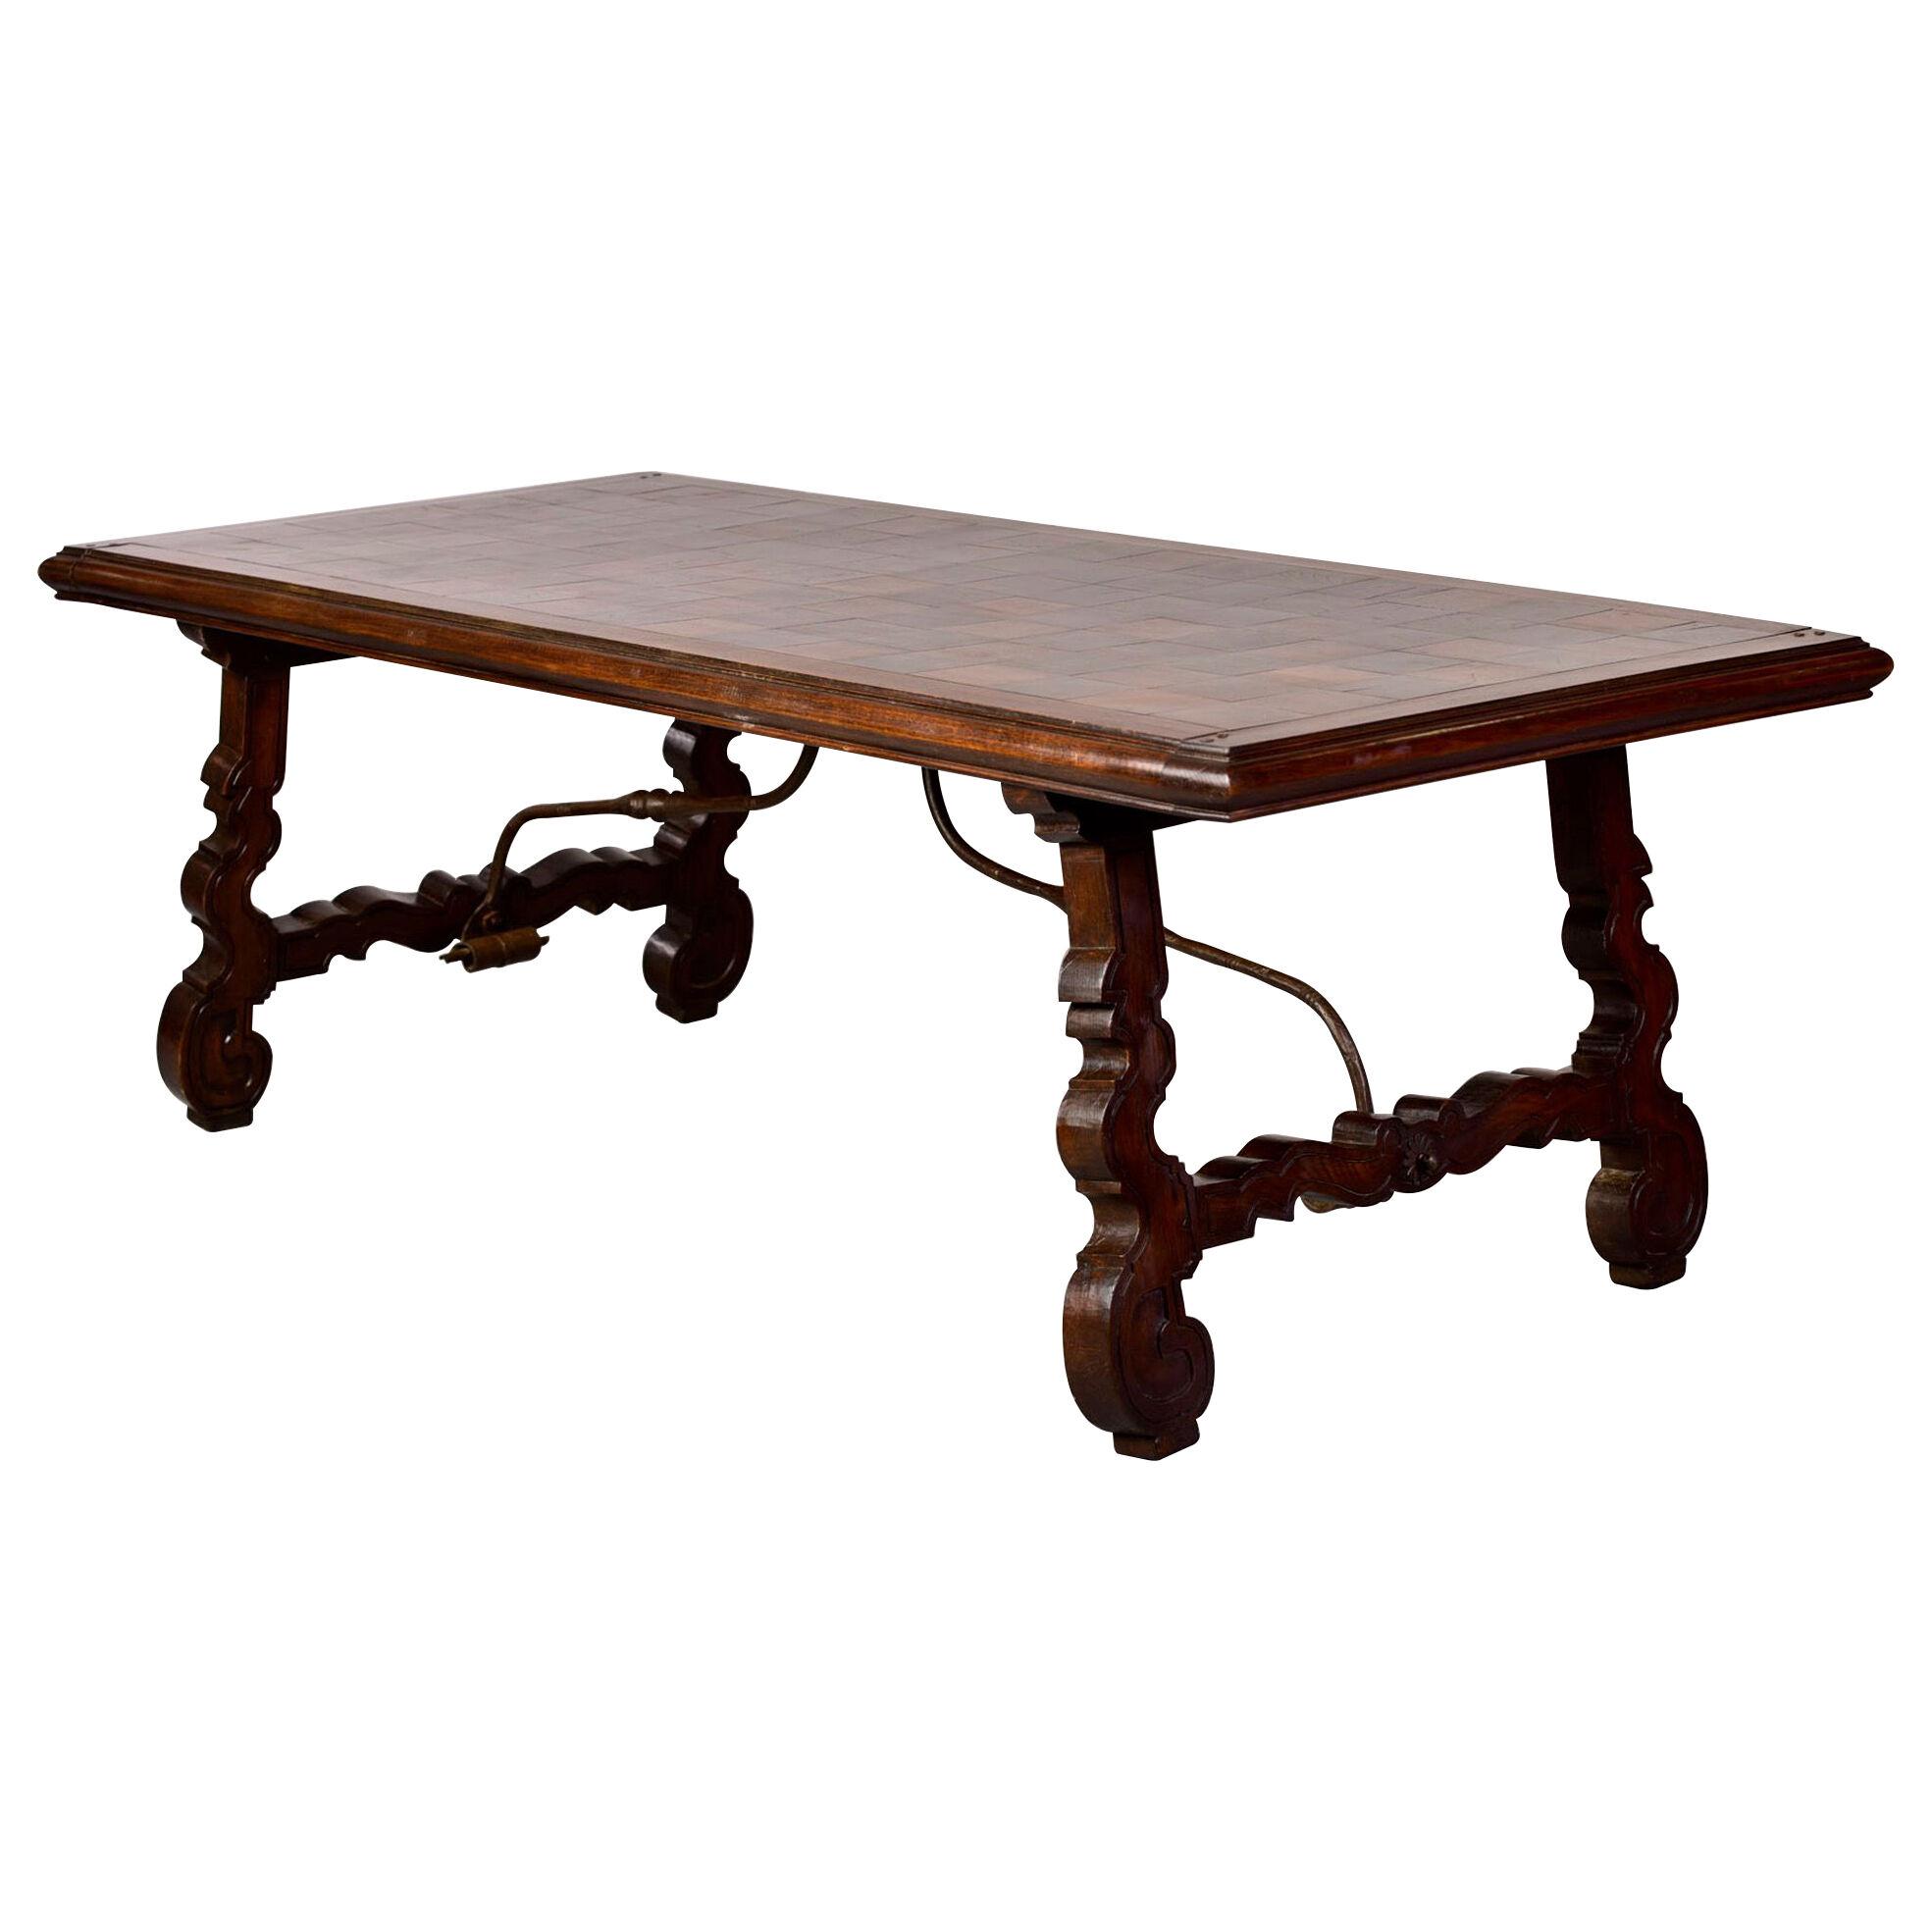 Large 19th C Spanish Walnut Table With Marquetry Top And Iron Stretcher